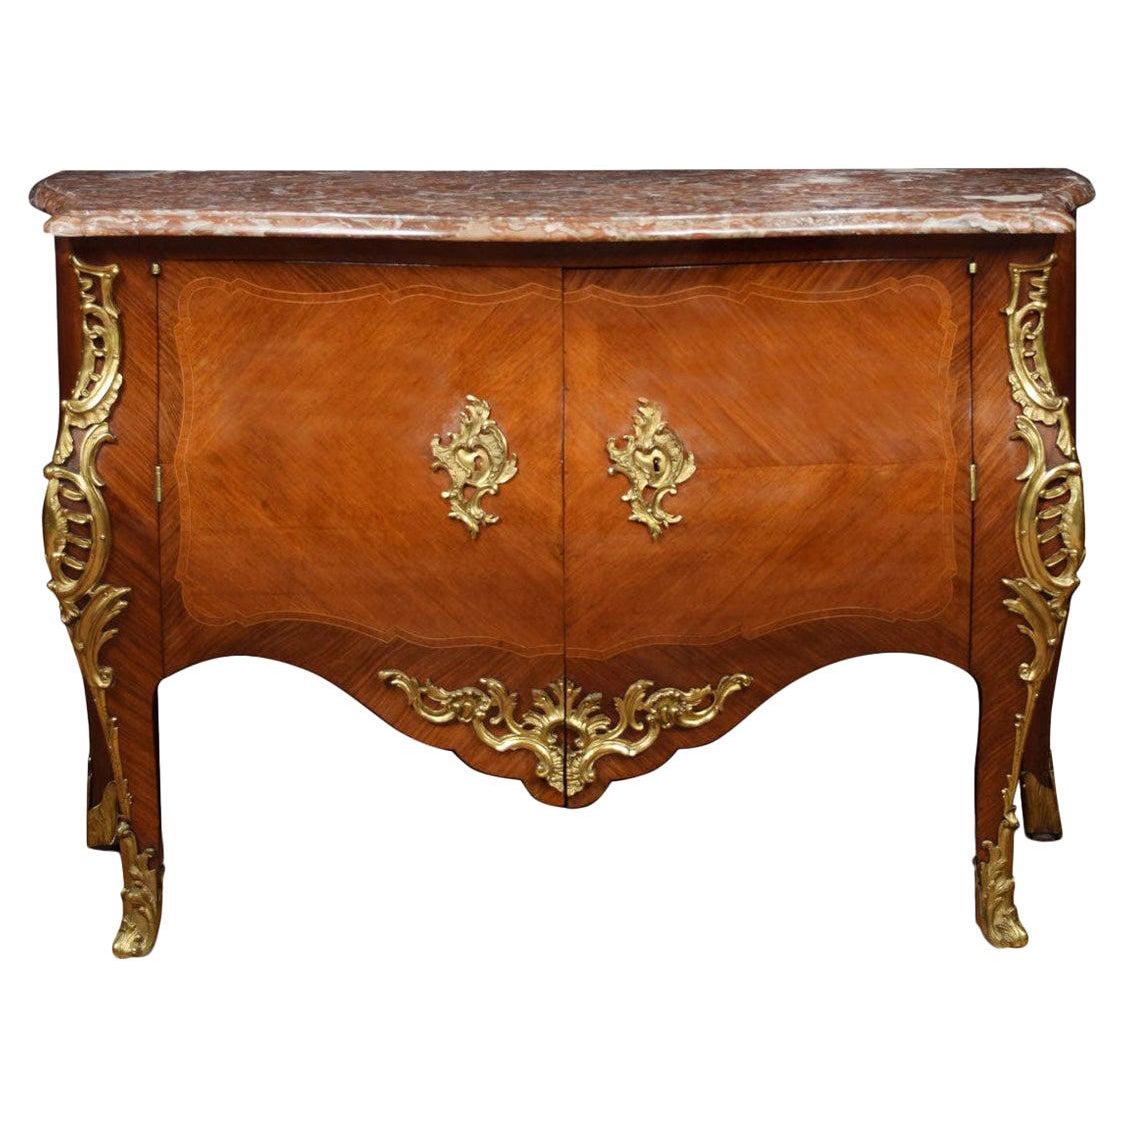 Late 18th Century French Gilt Bronze-Mounted Commode